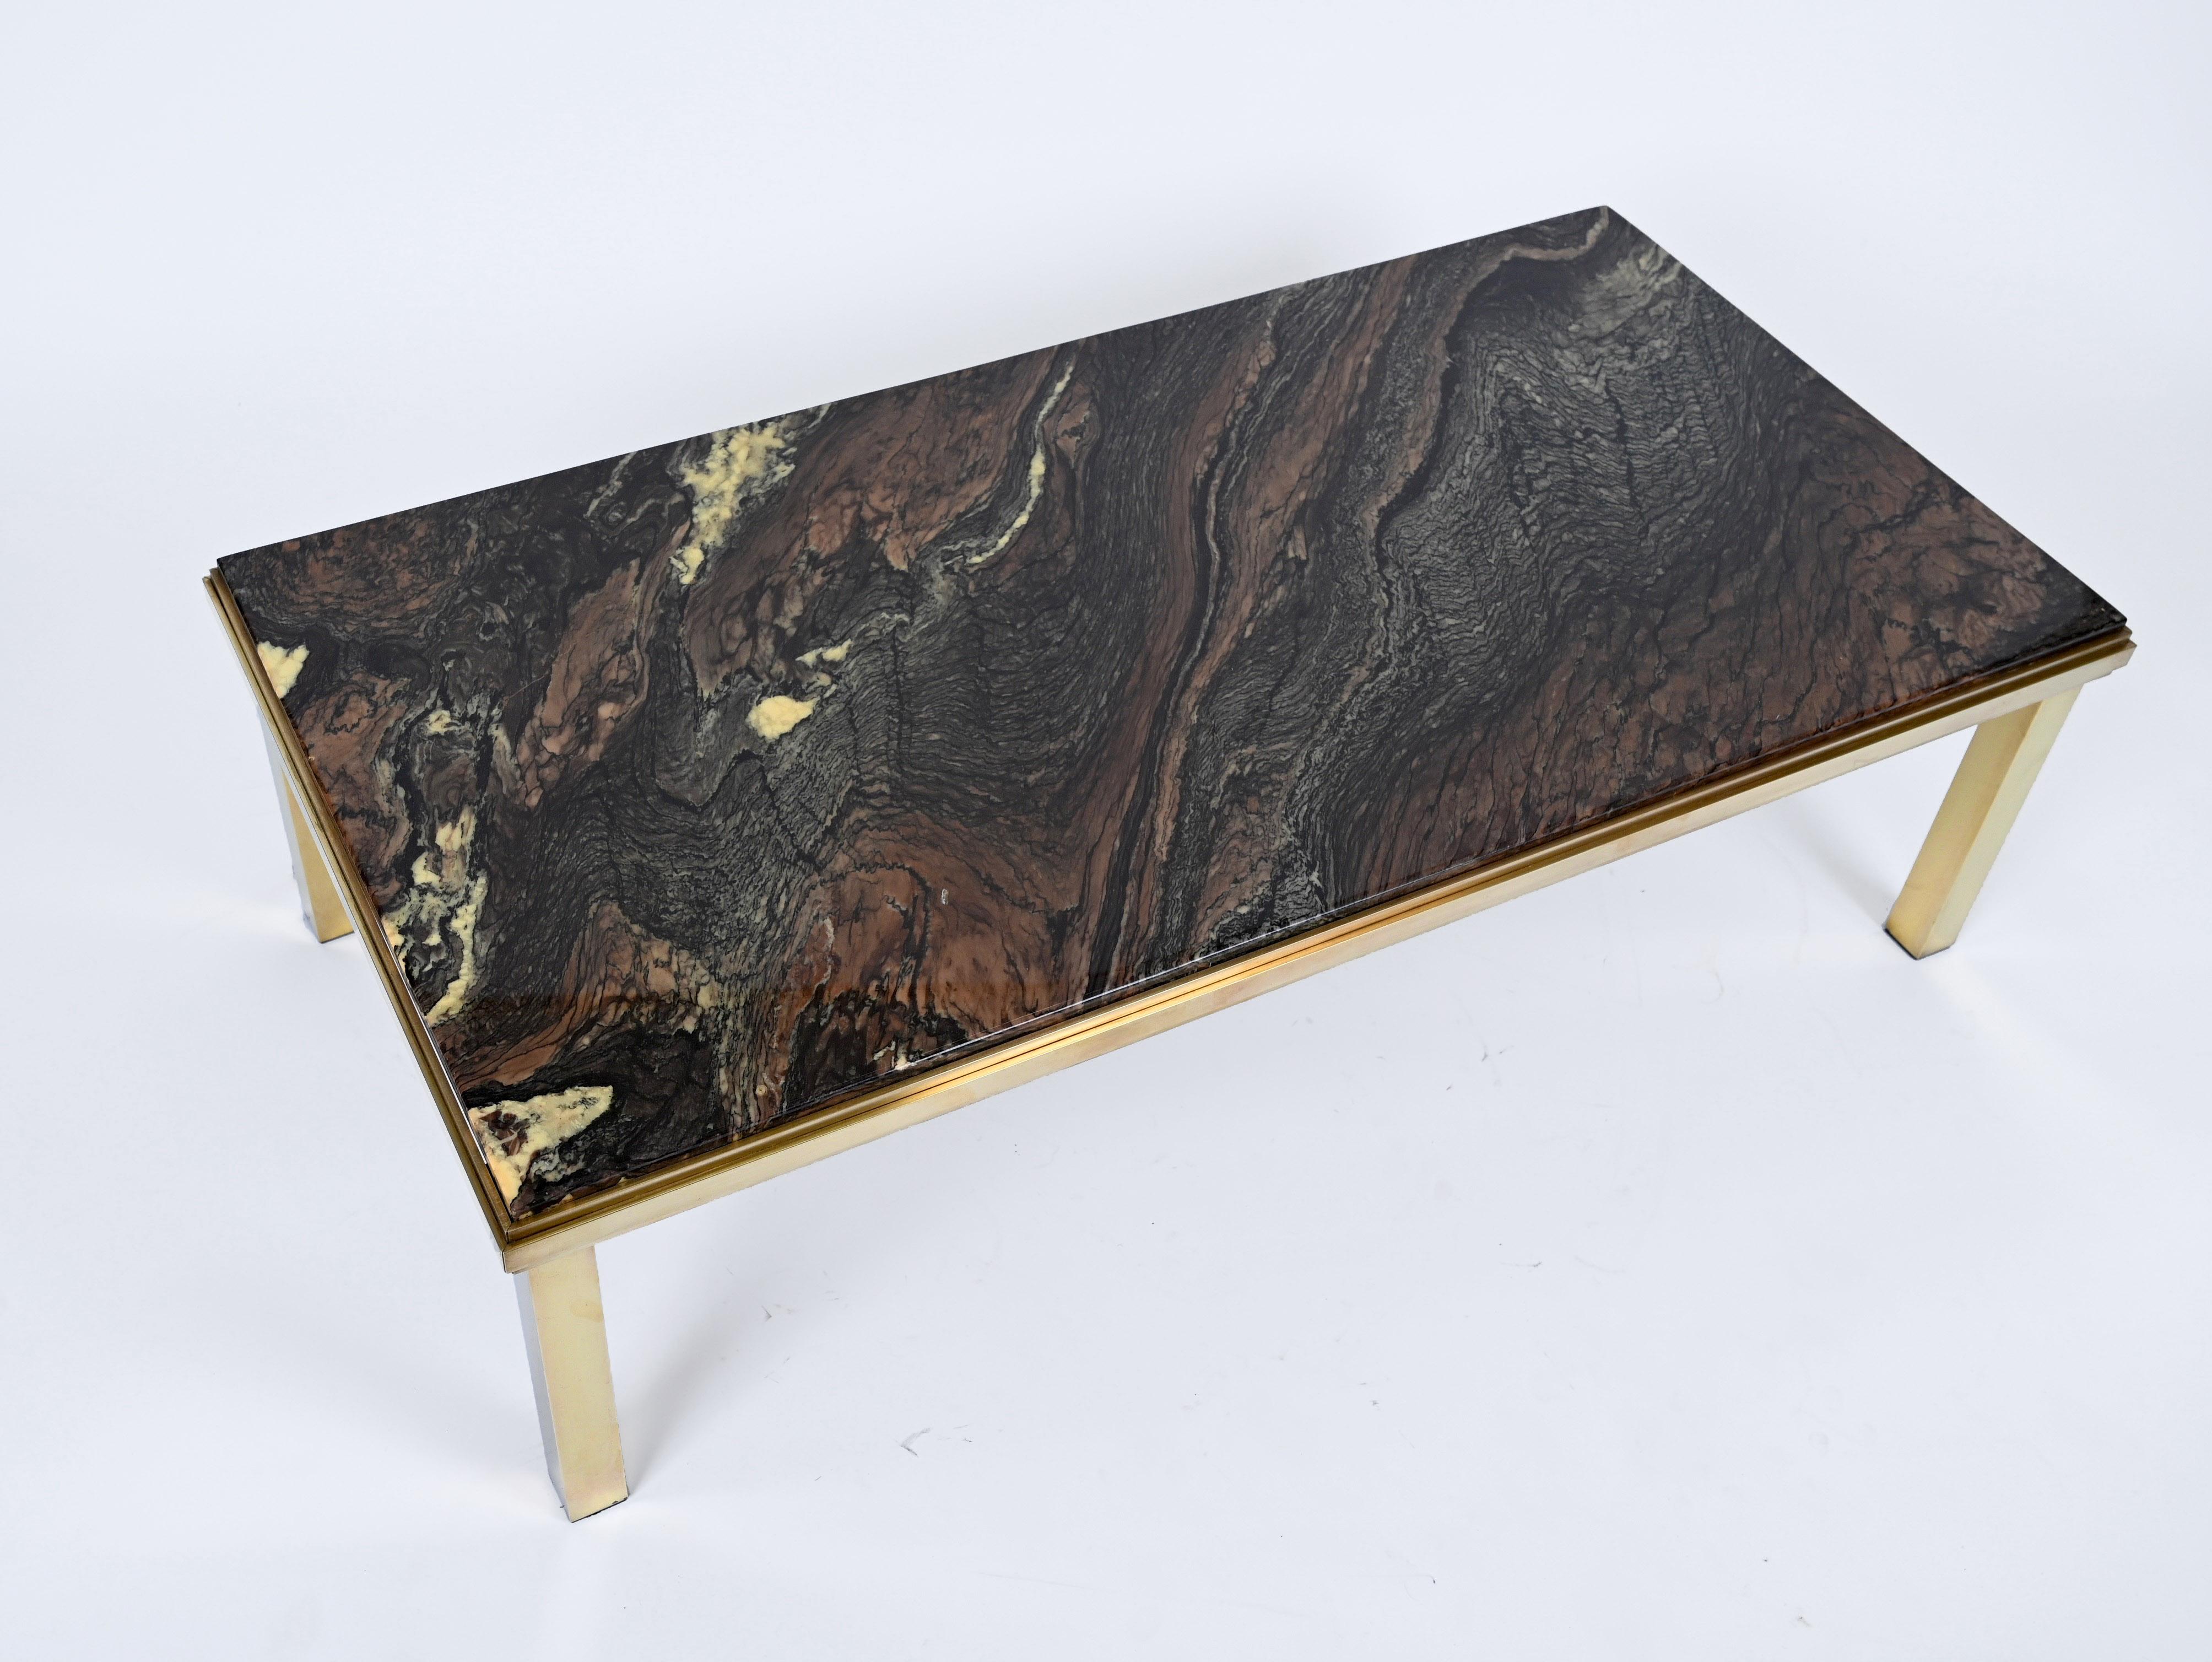 Midcentury Quartzite Marble and Brass Rectangular Italian Coffee Table, 1970s For Sale 5